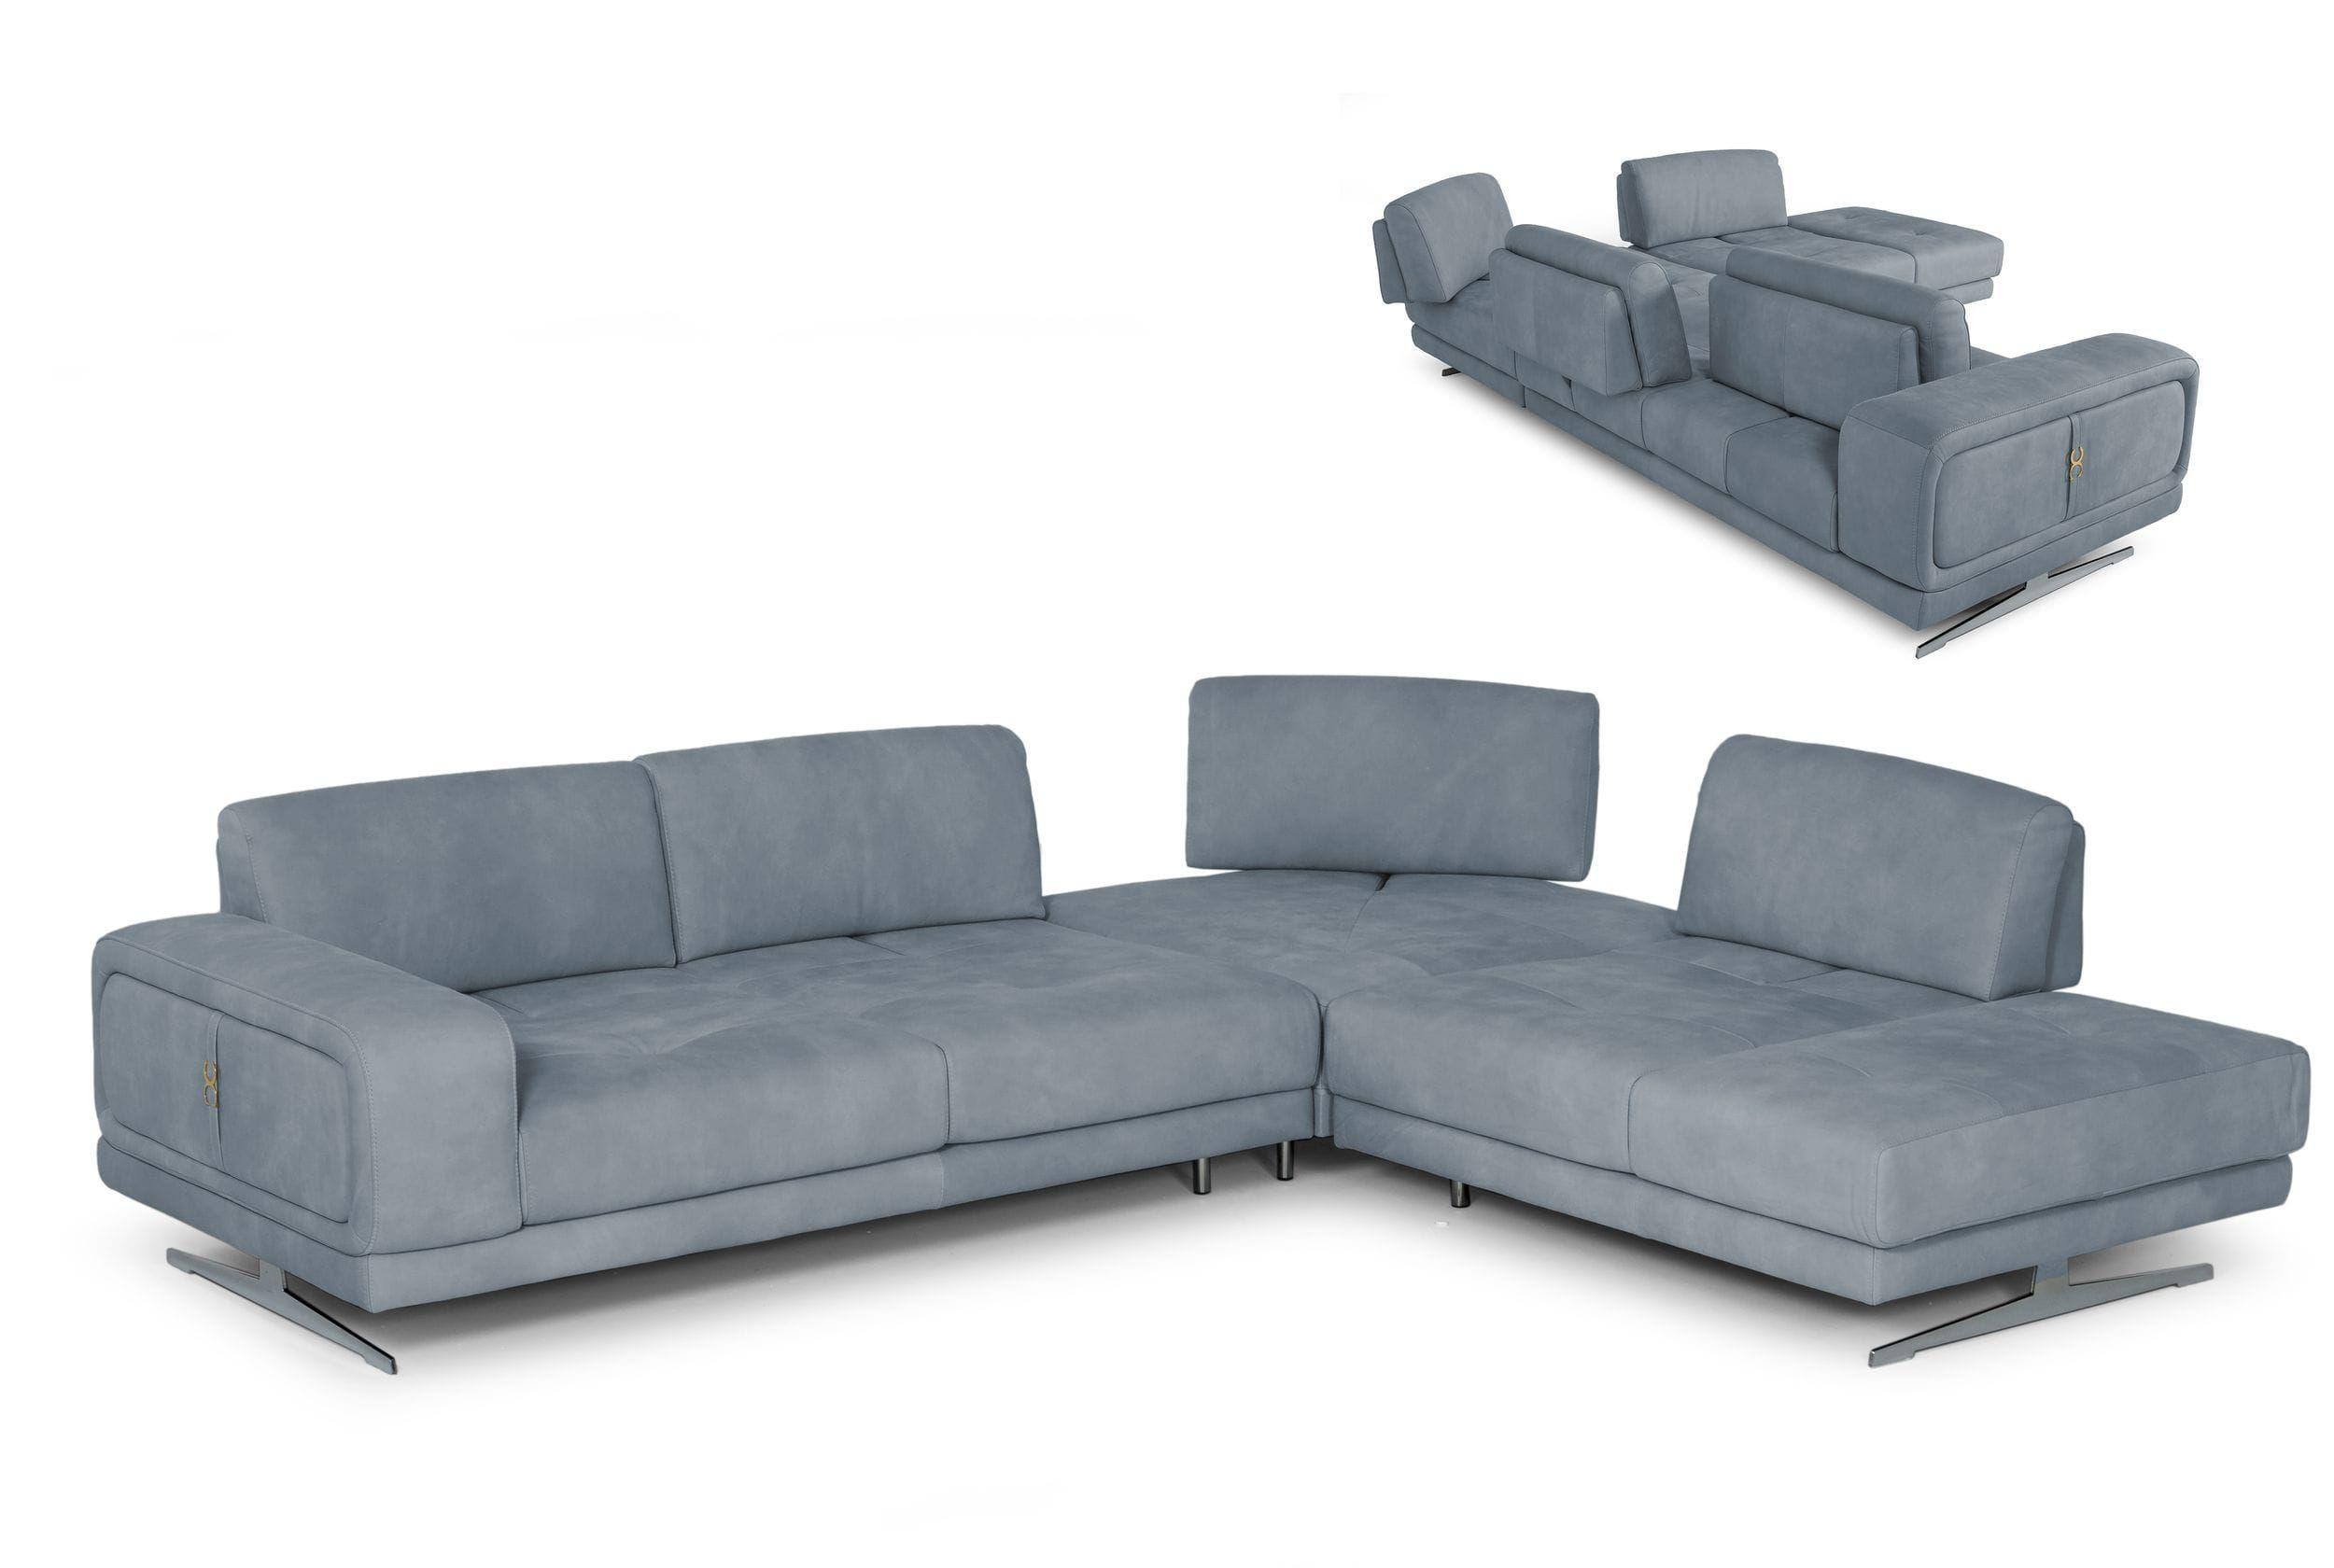 Contemporary, Modern Sectional Sofa VGCCMOOD-SPAZIO-BLUE-RAF VGCCMOOD-SPAZIO-BLUE-RAF in Blue Italian Leather